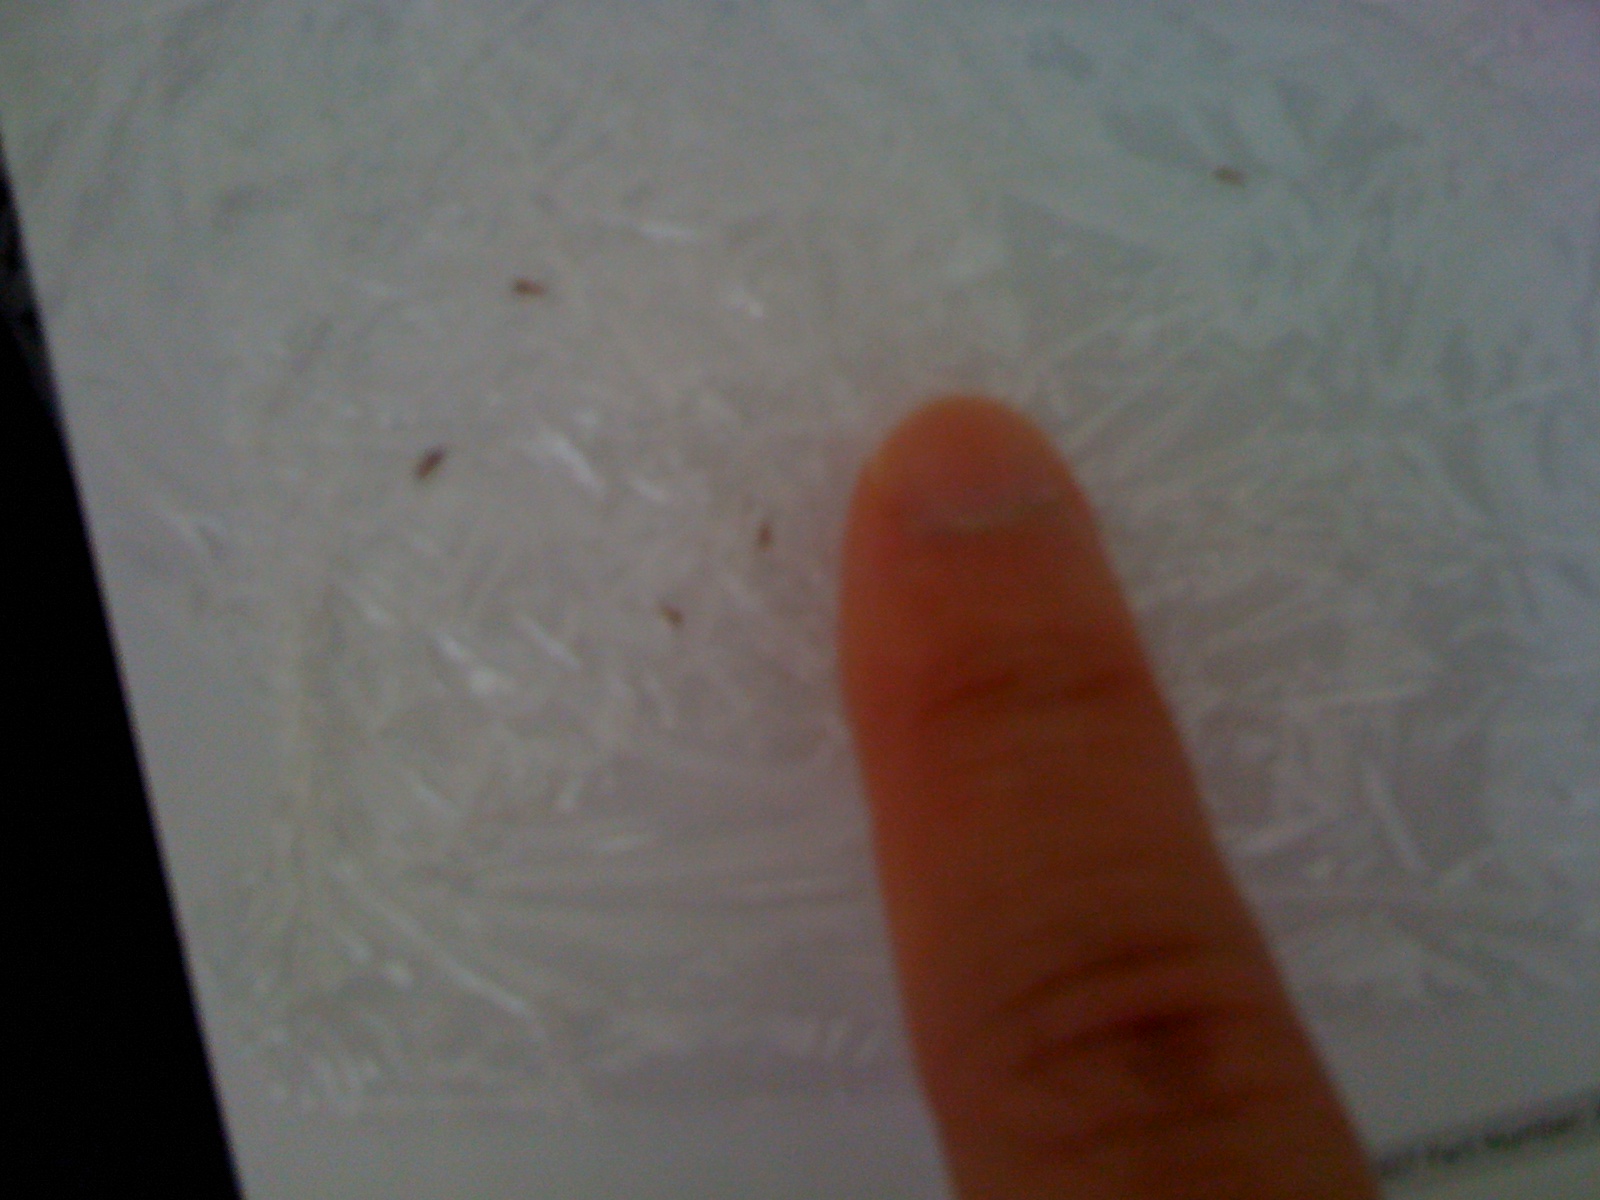 Mild Bed Bug Bites The bugs compared to my finger